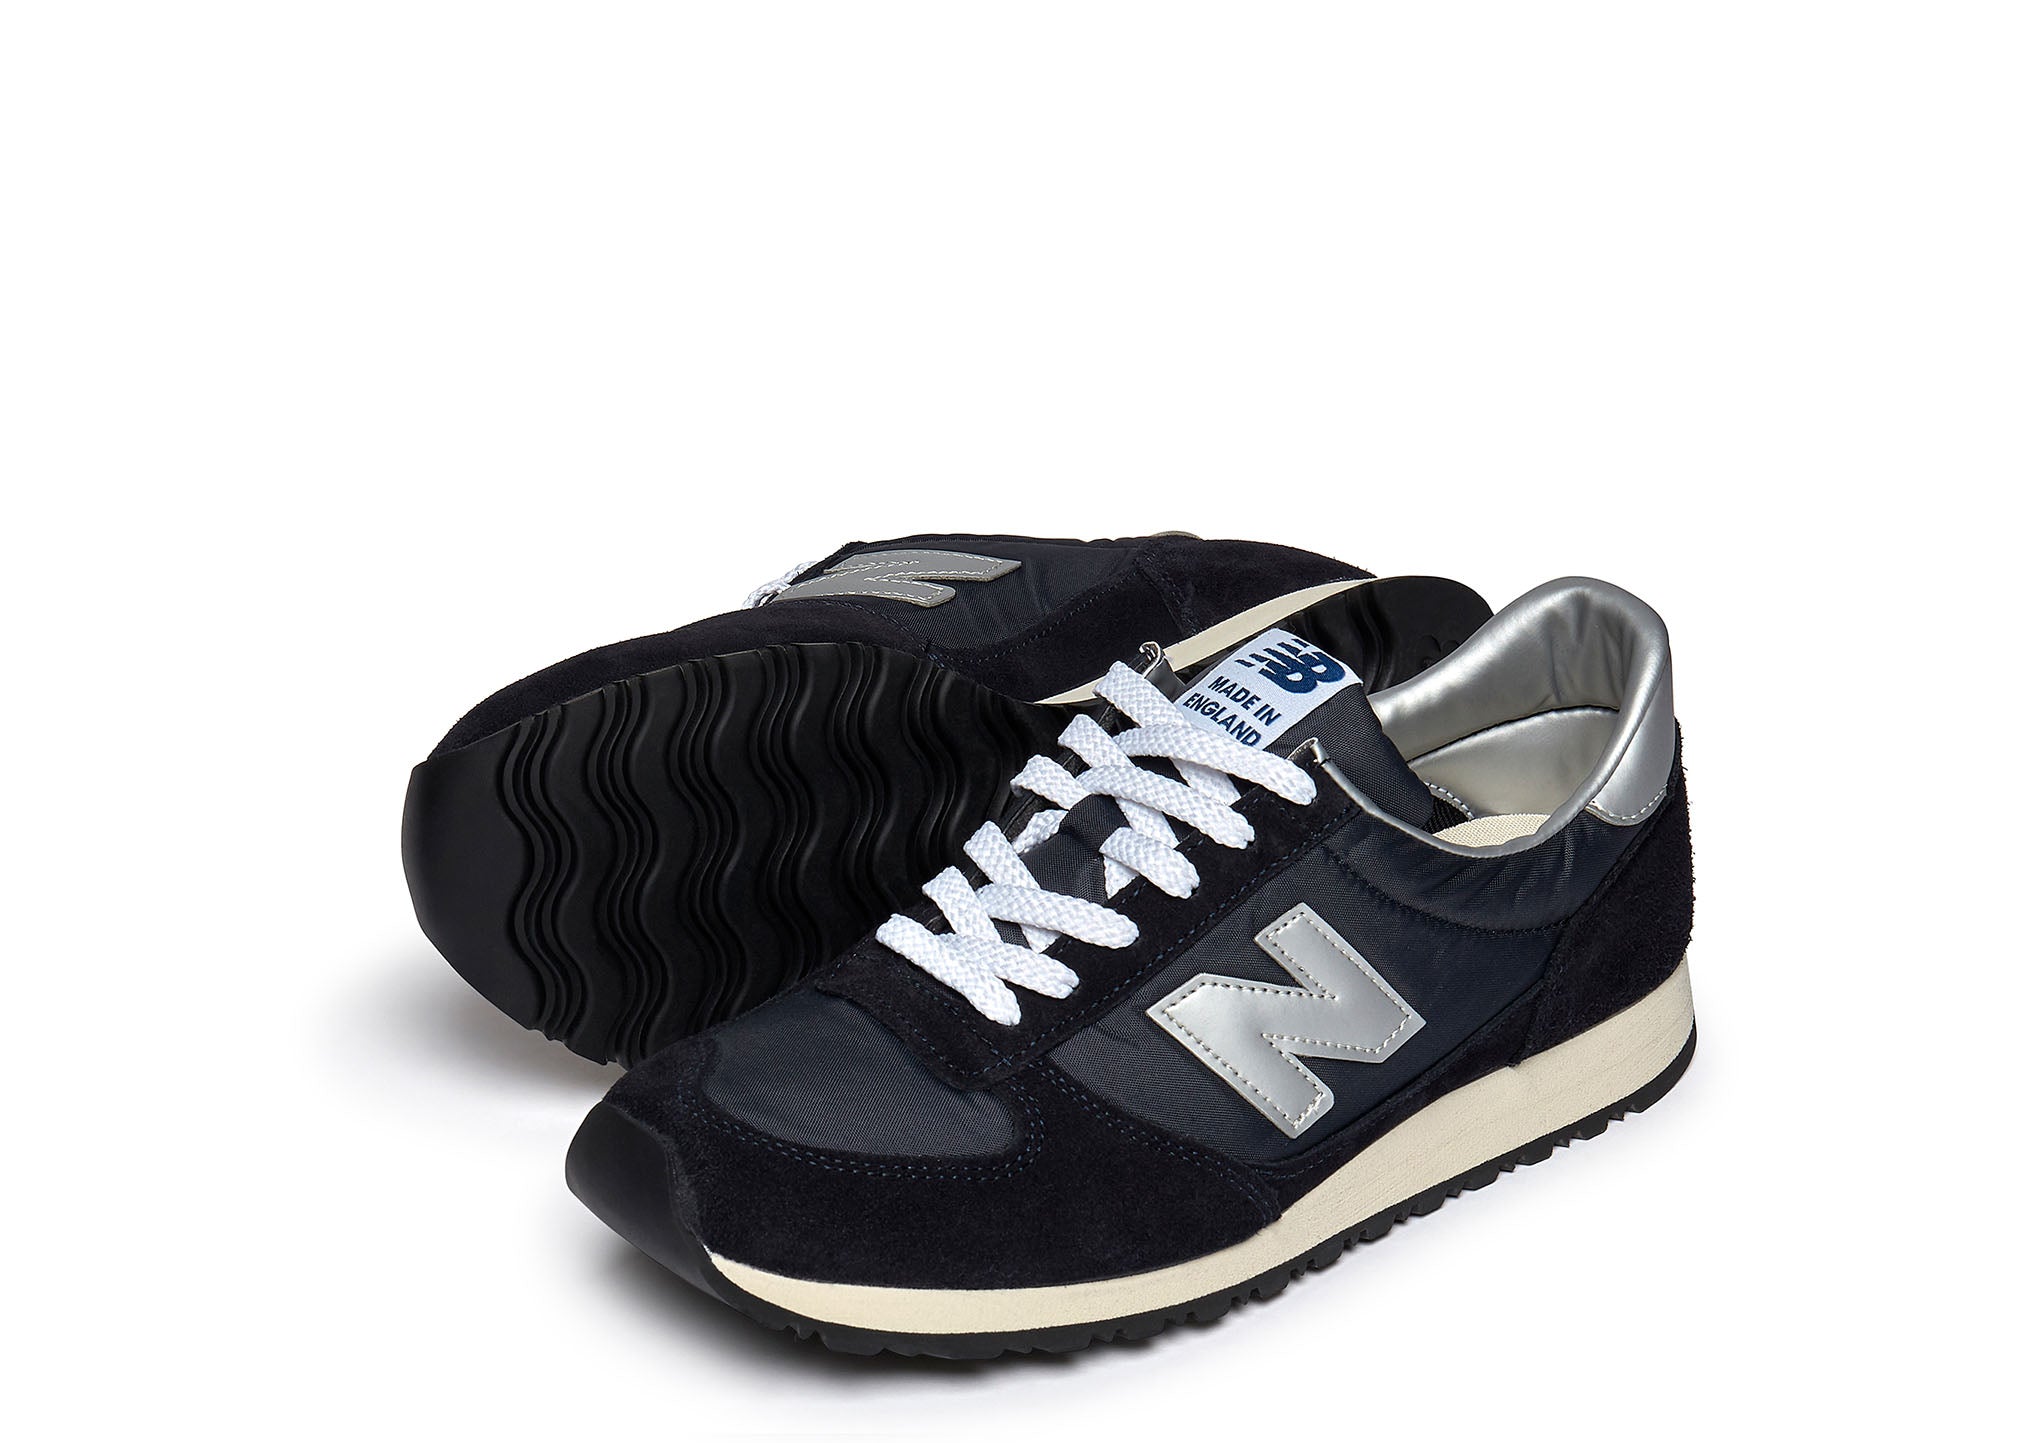 new balance made in uk national class